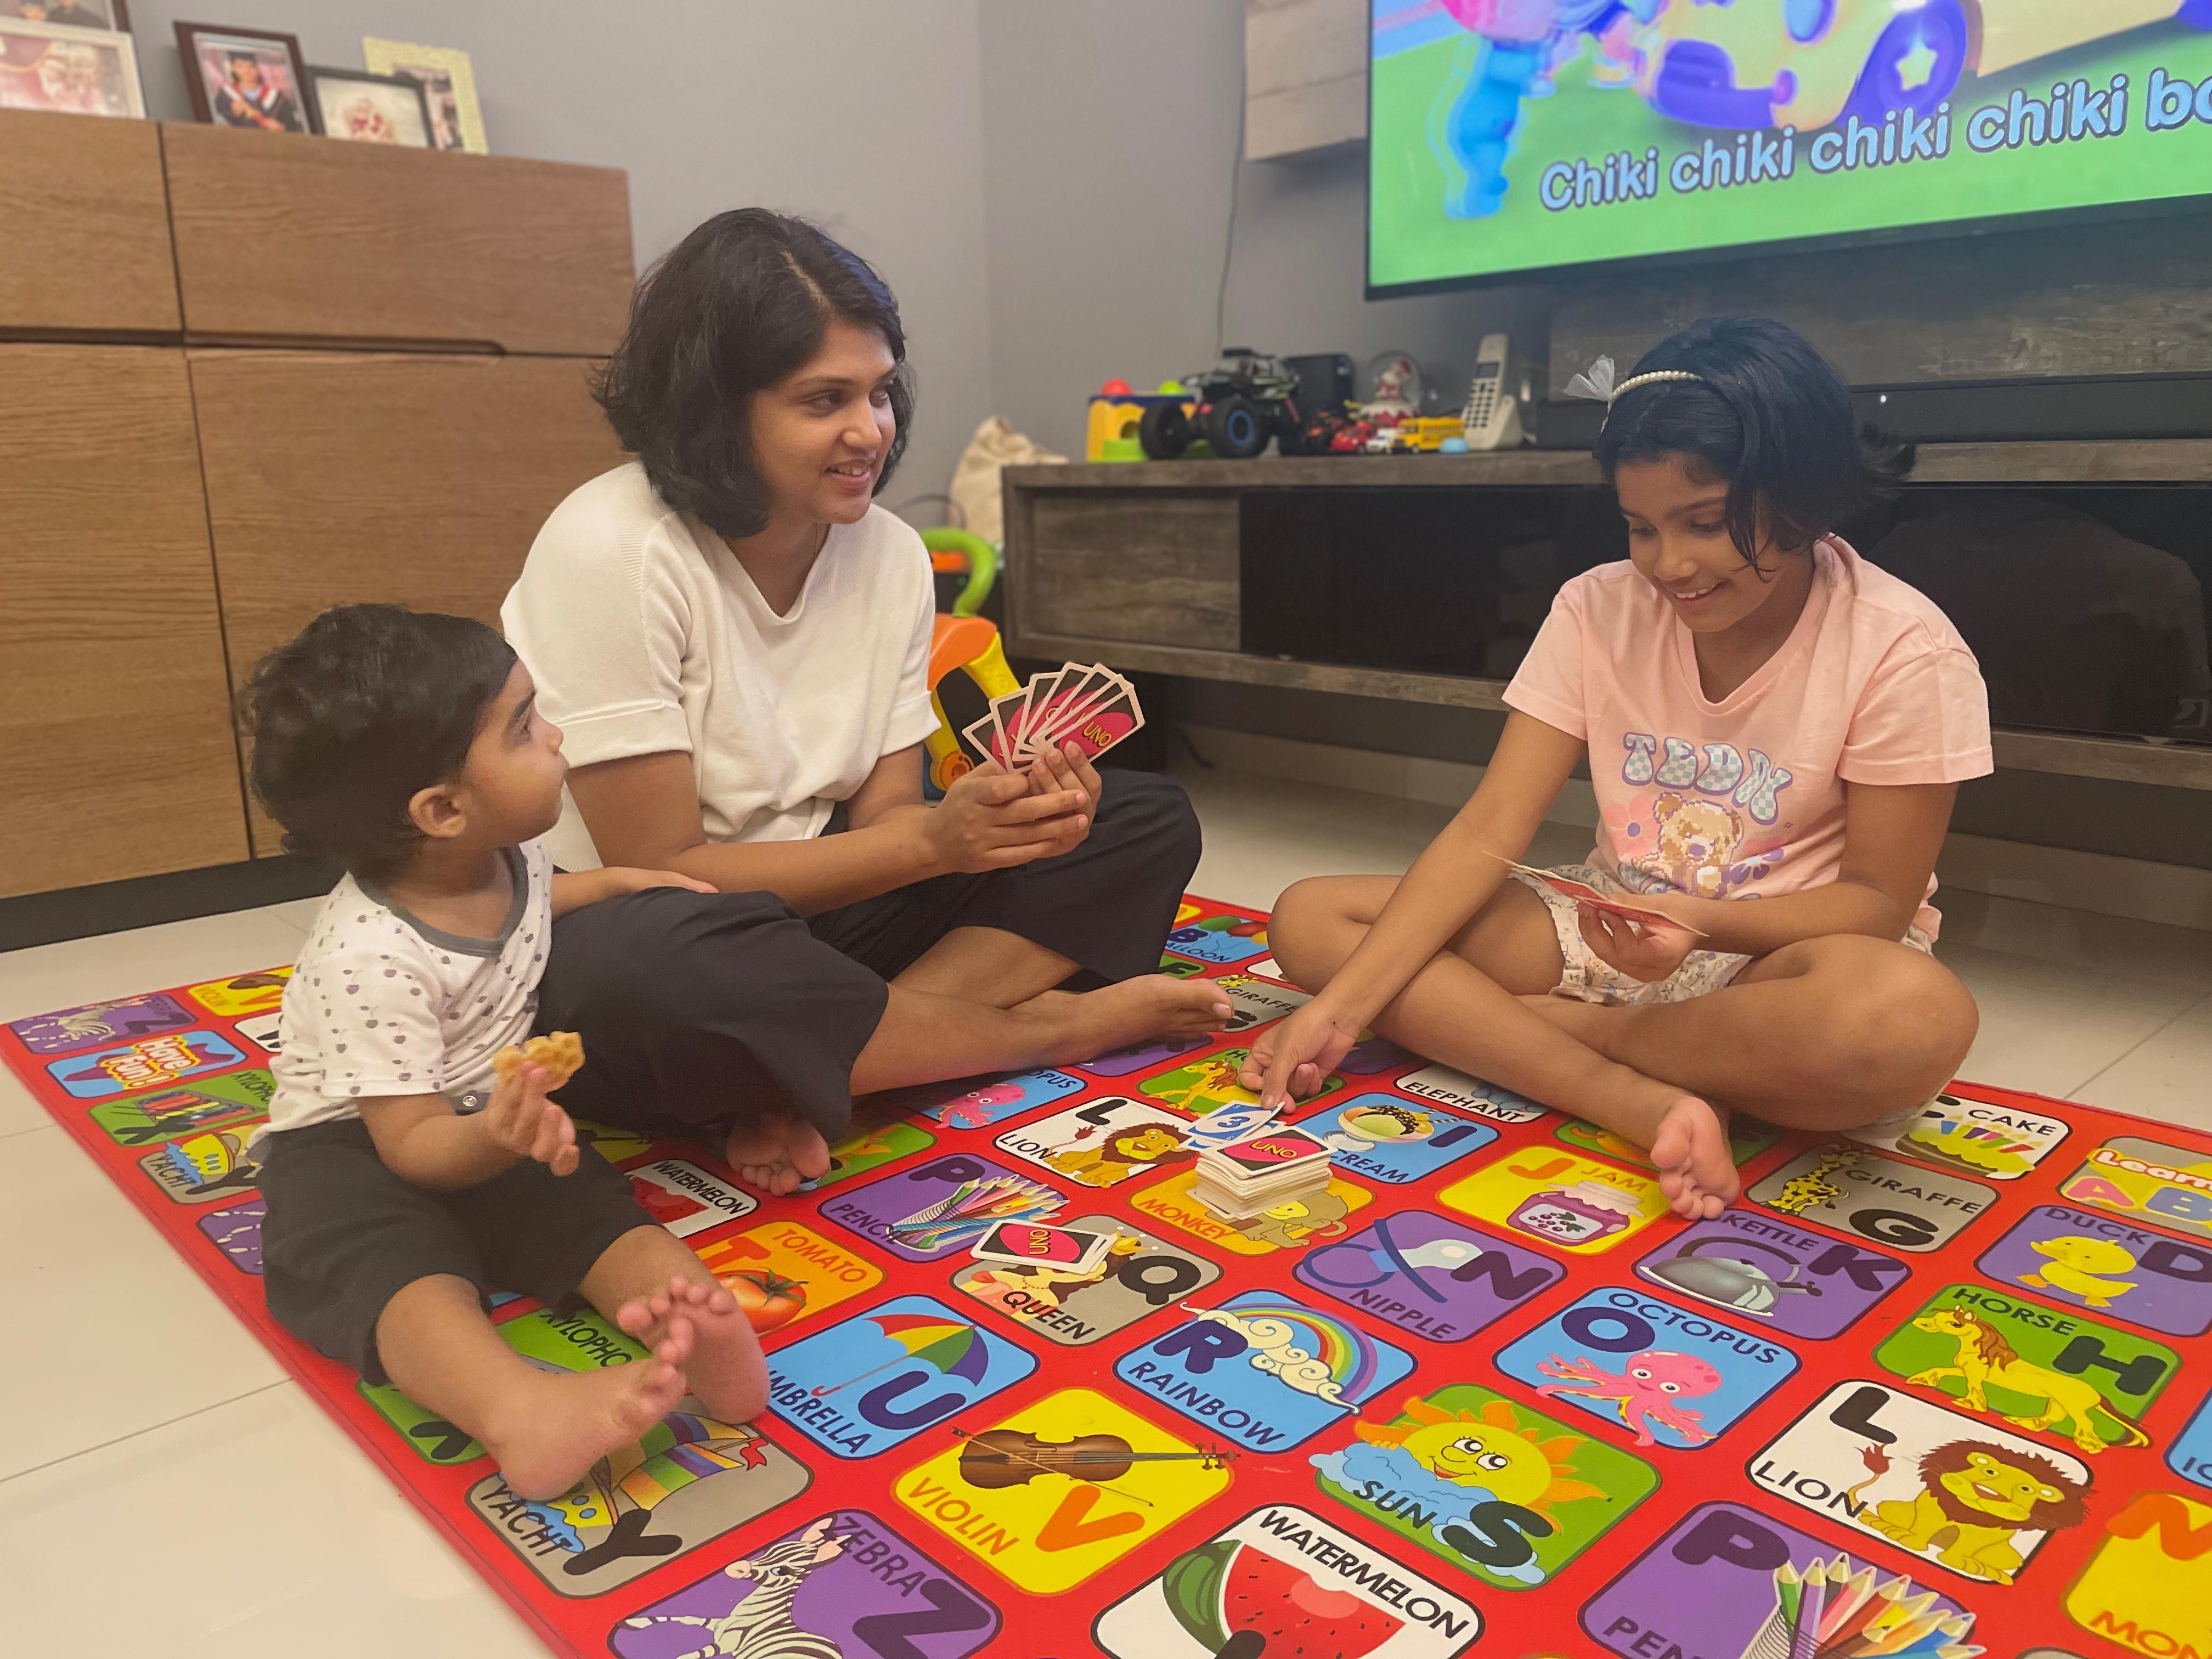 Nimmi spending quality time with her children, playing board games.